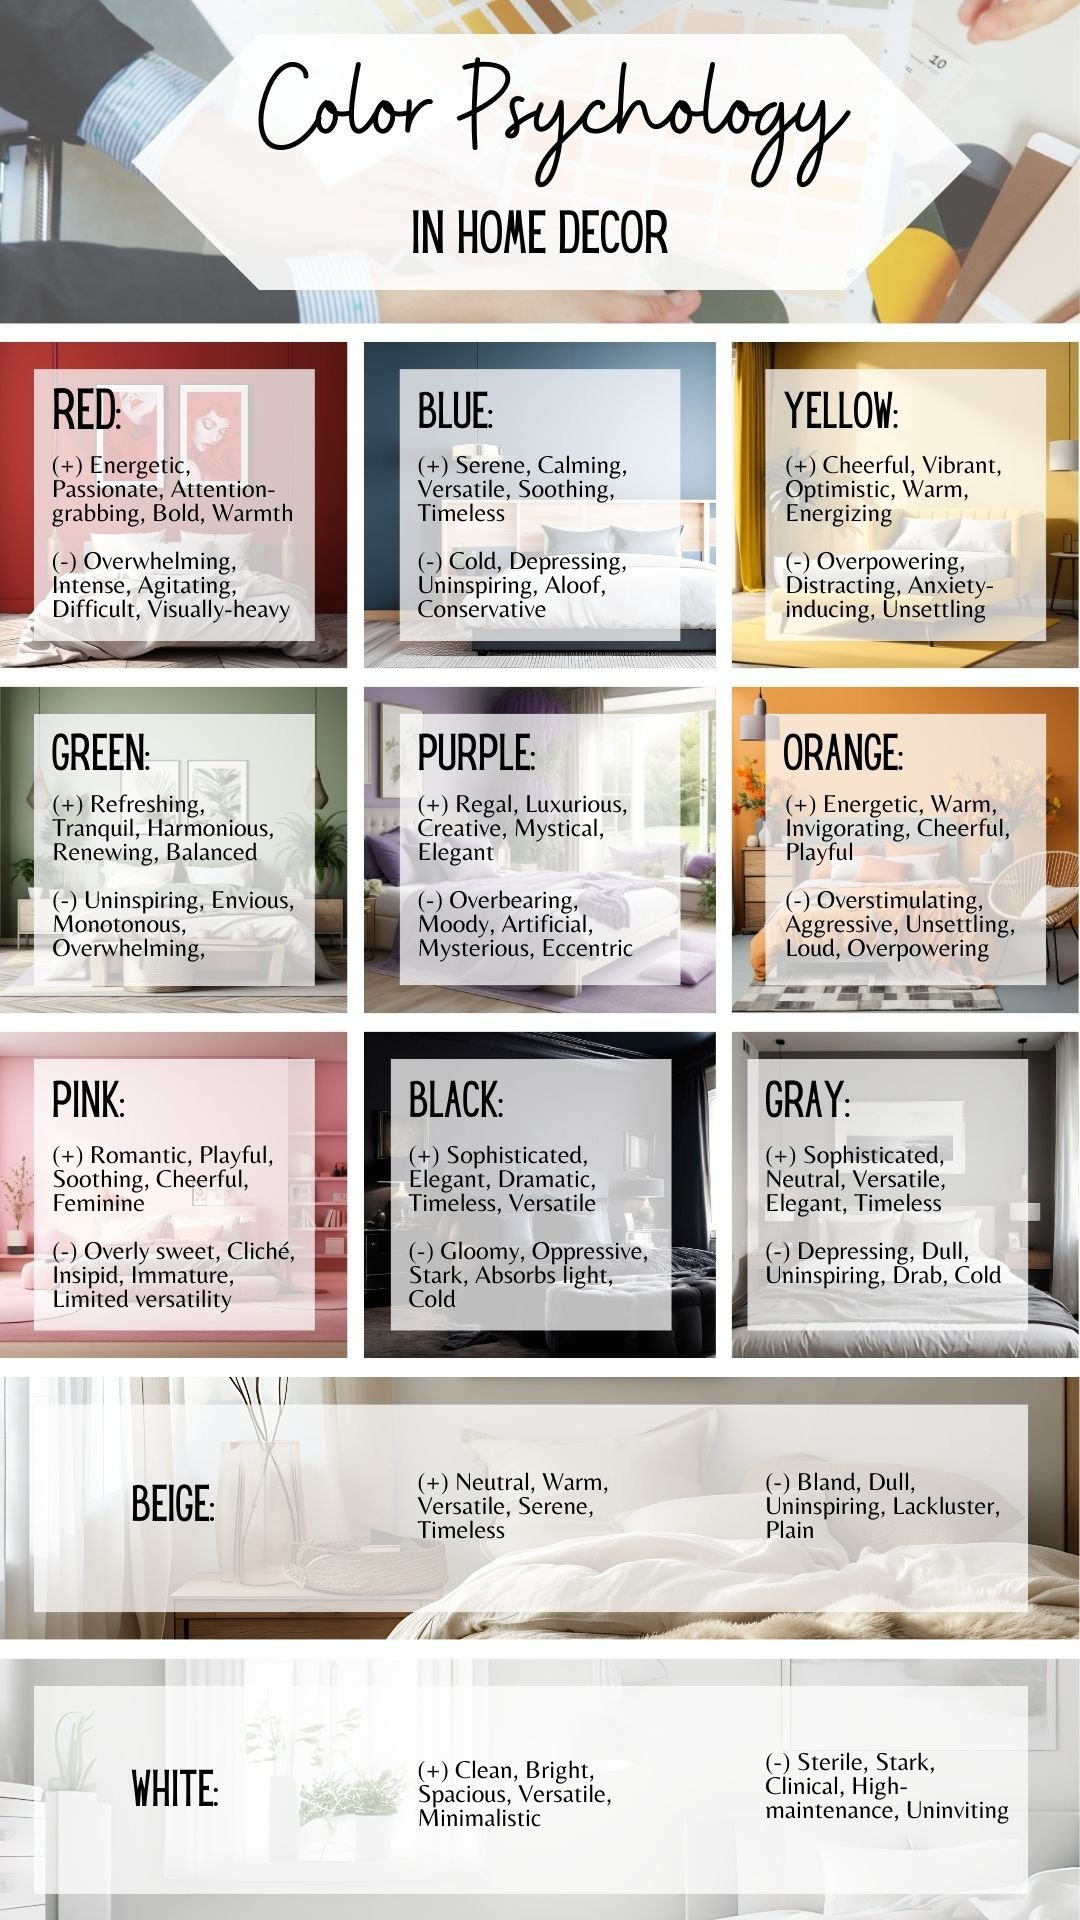 Pinterest post about color psychology in interior design. 